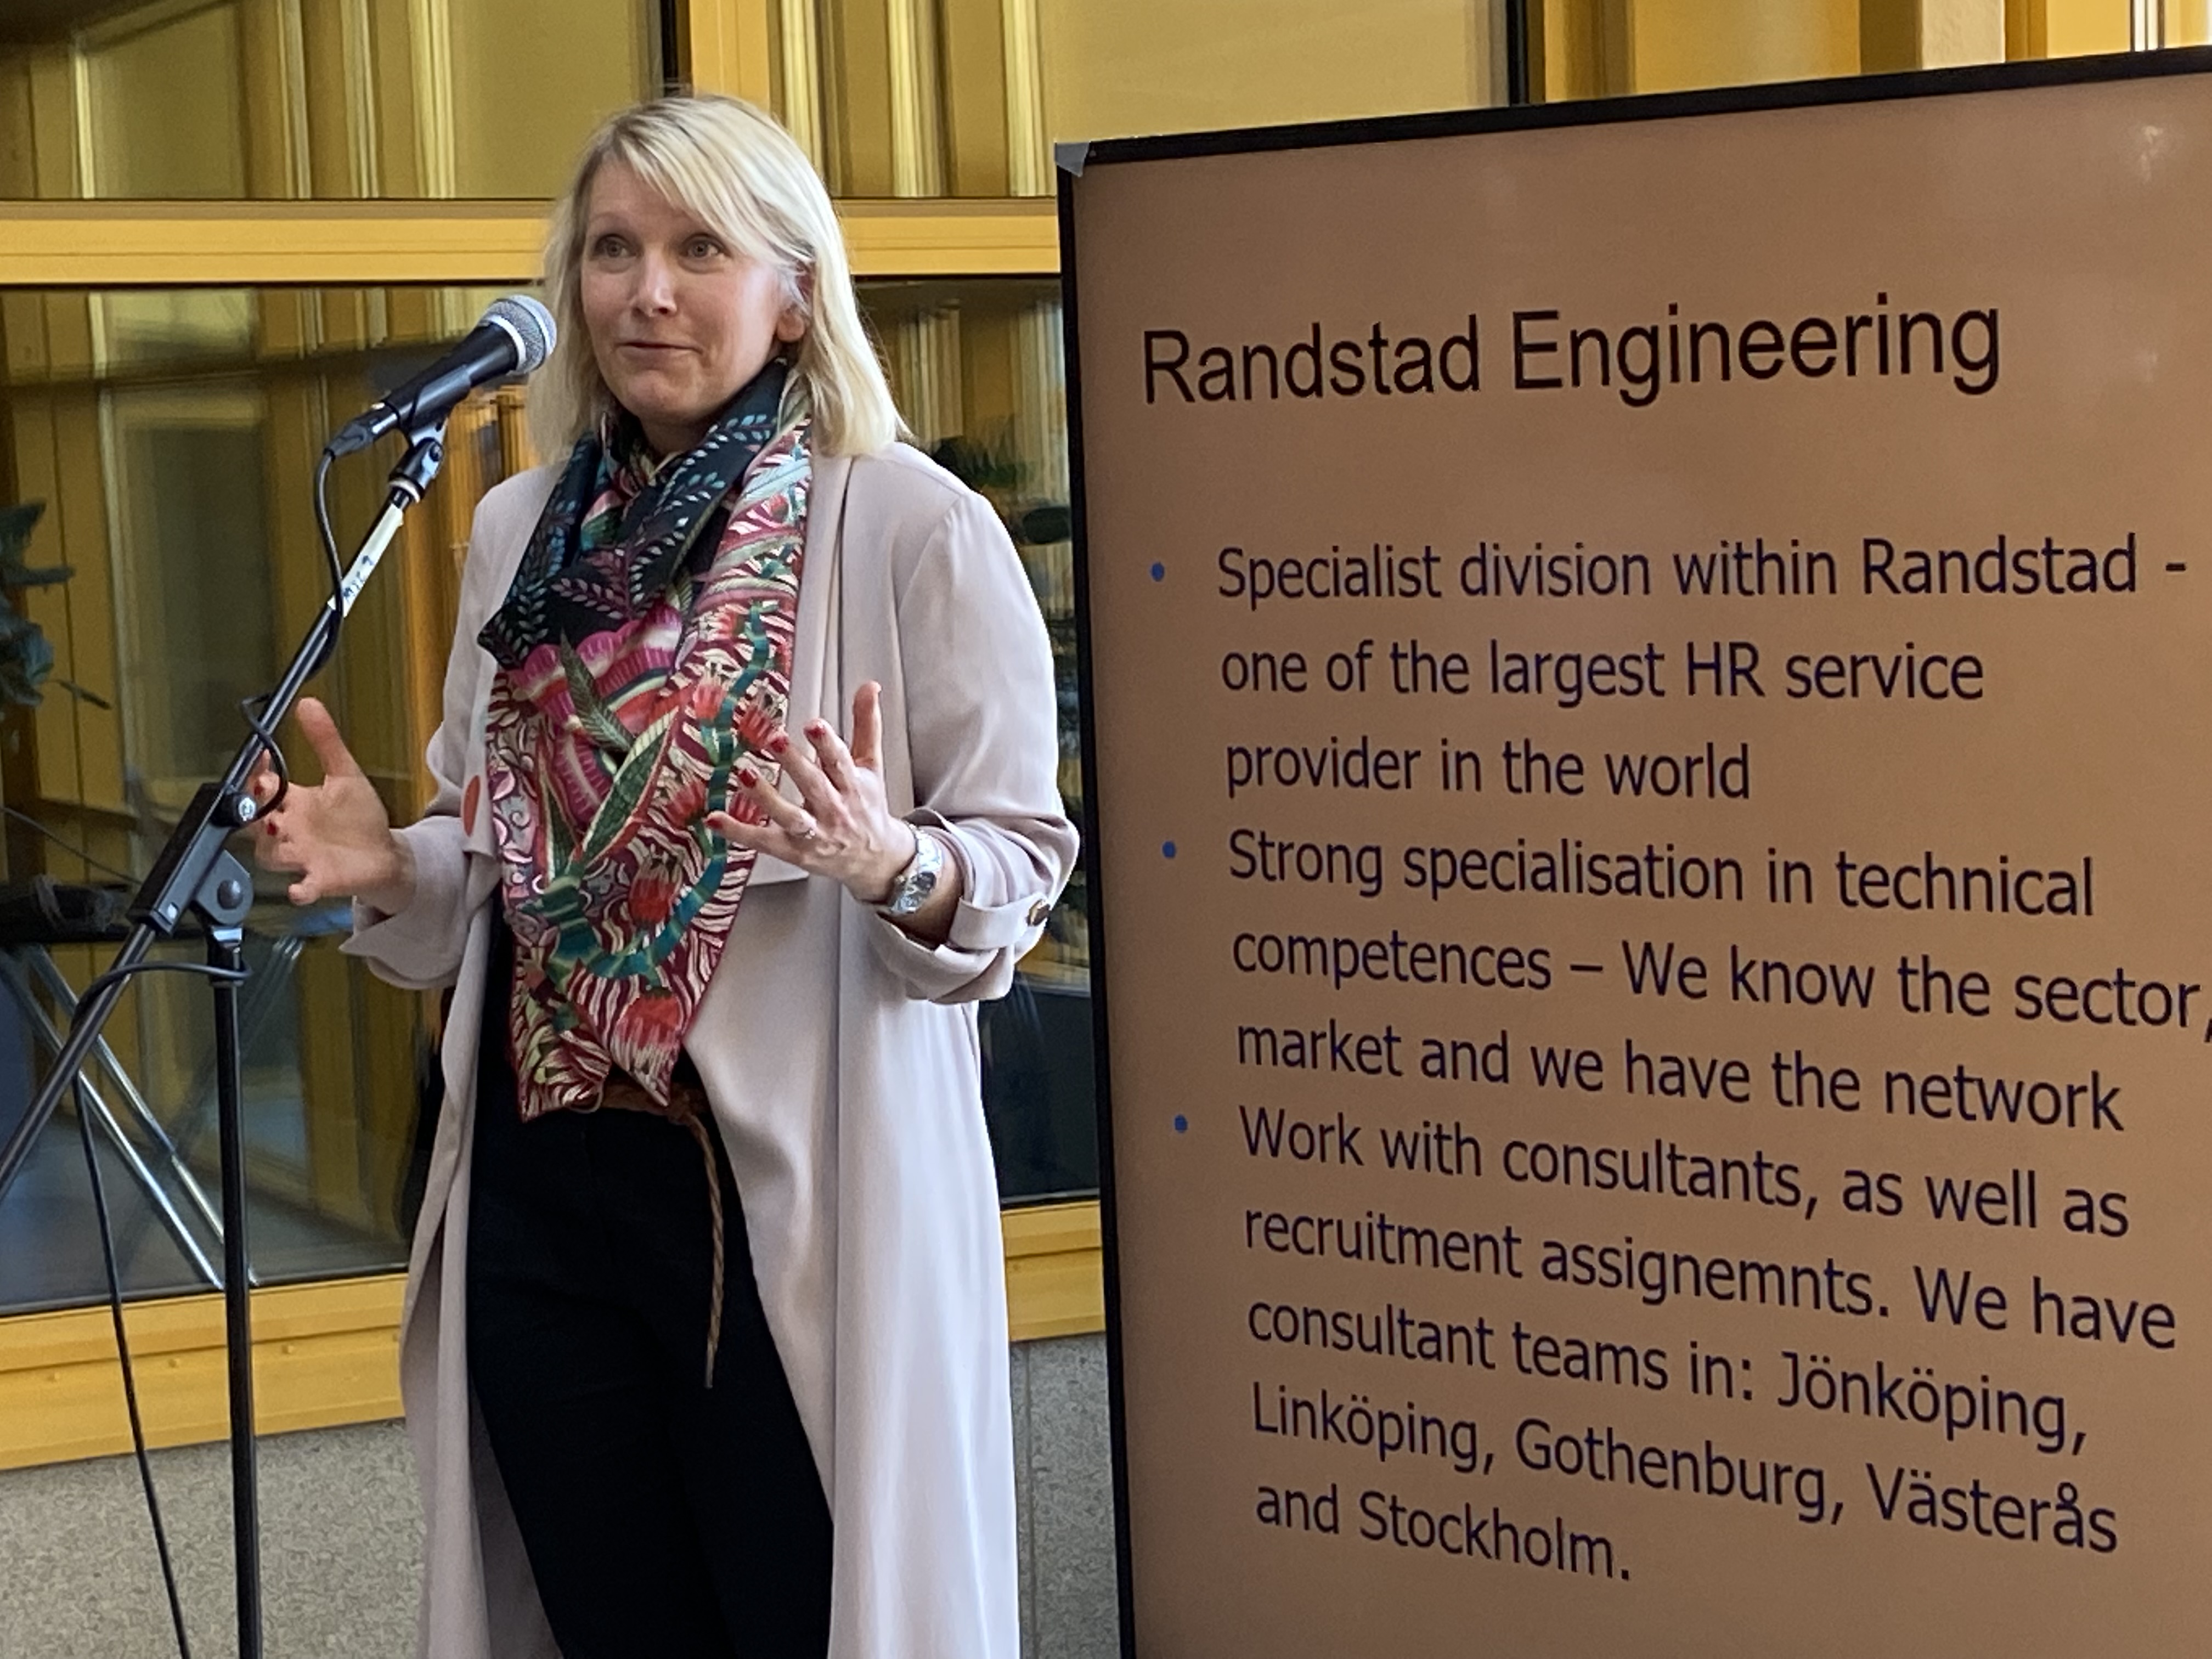 Maria Lönn, business area manager at Randstad Engineering.